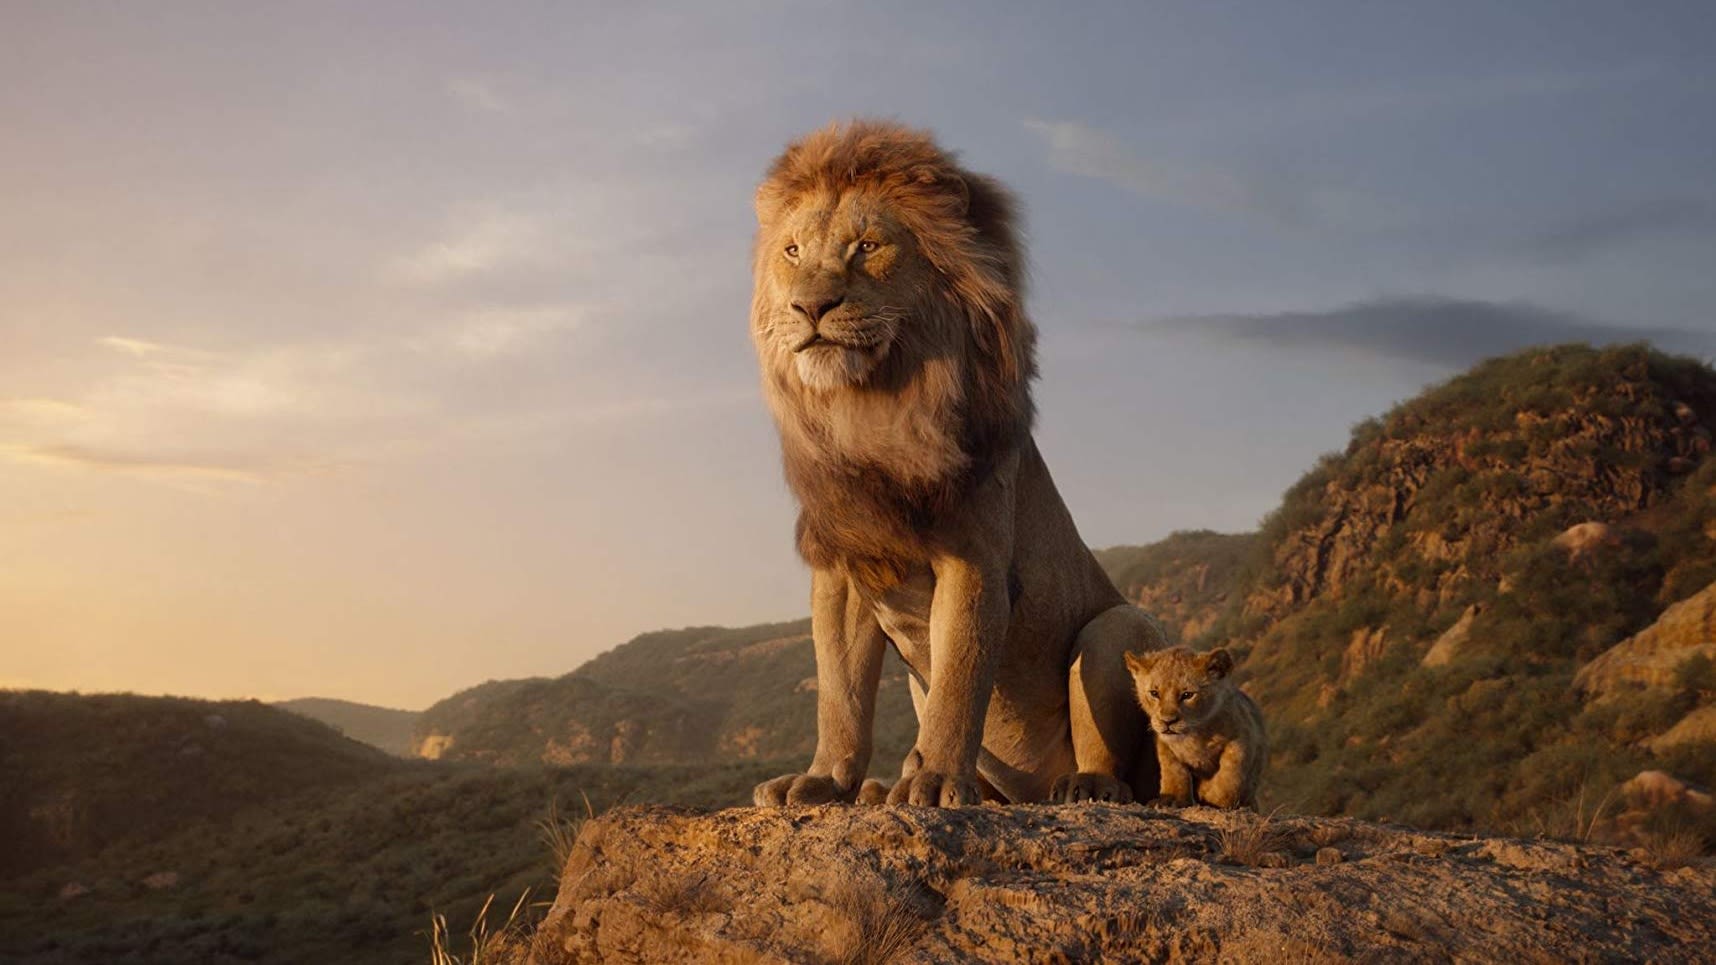 Disney's 'The Lion King' reviews are in. Here's what critics think